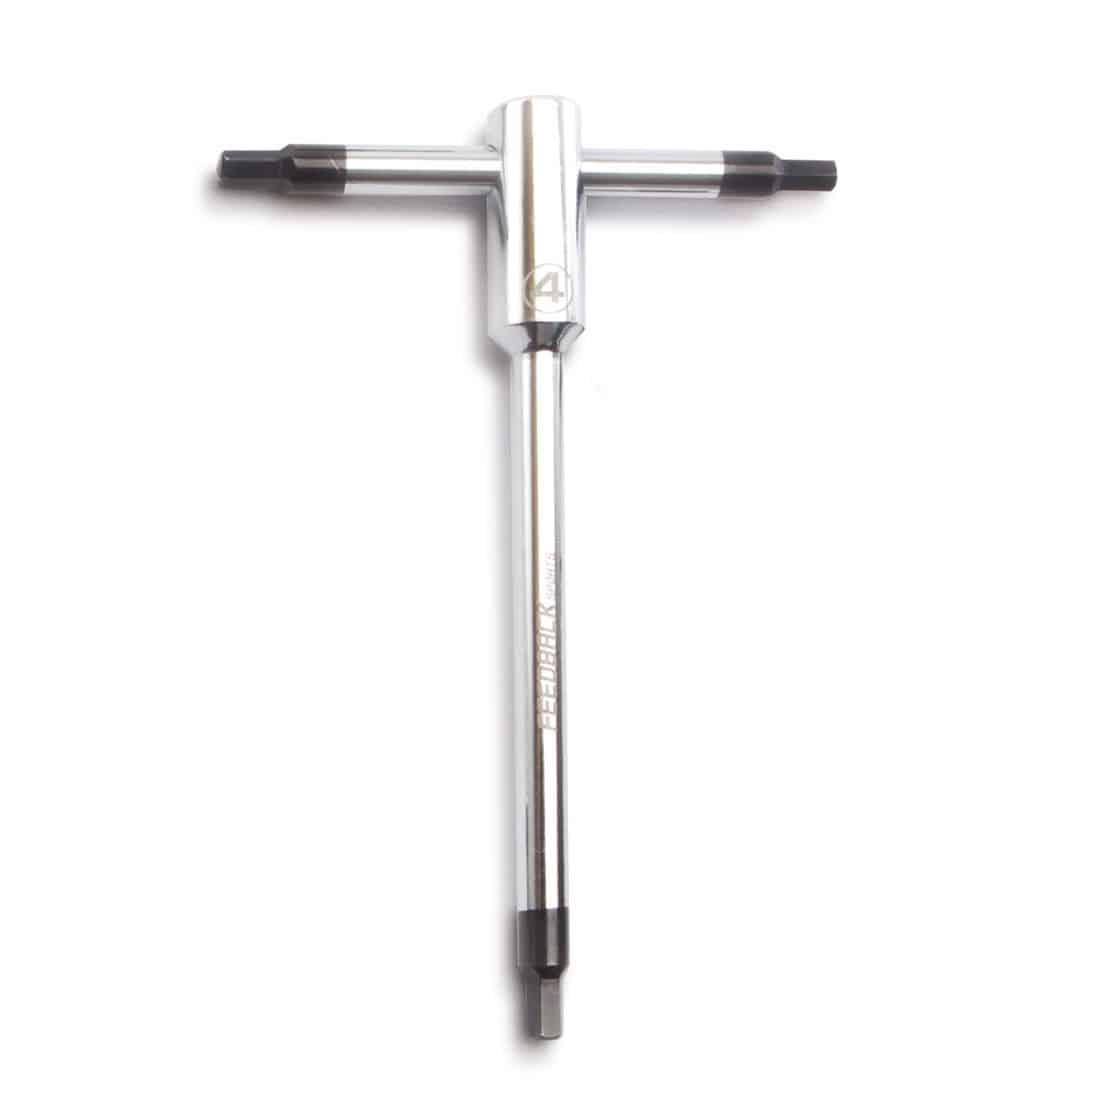 Bicycle t-handle hex wrench on white background.